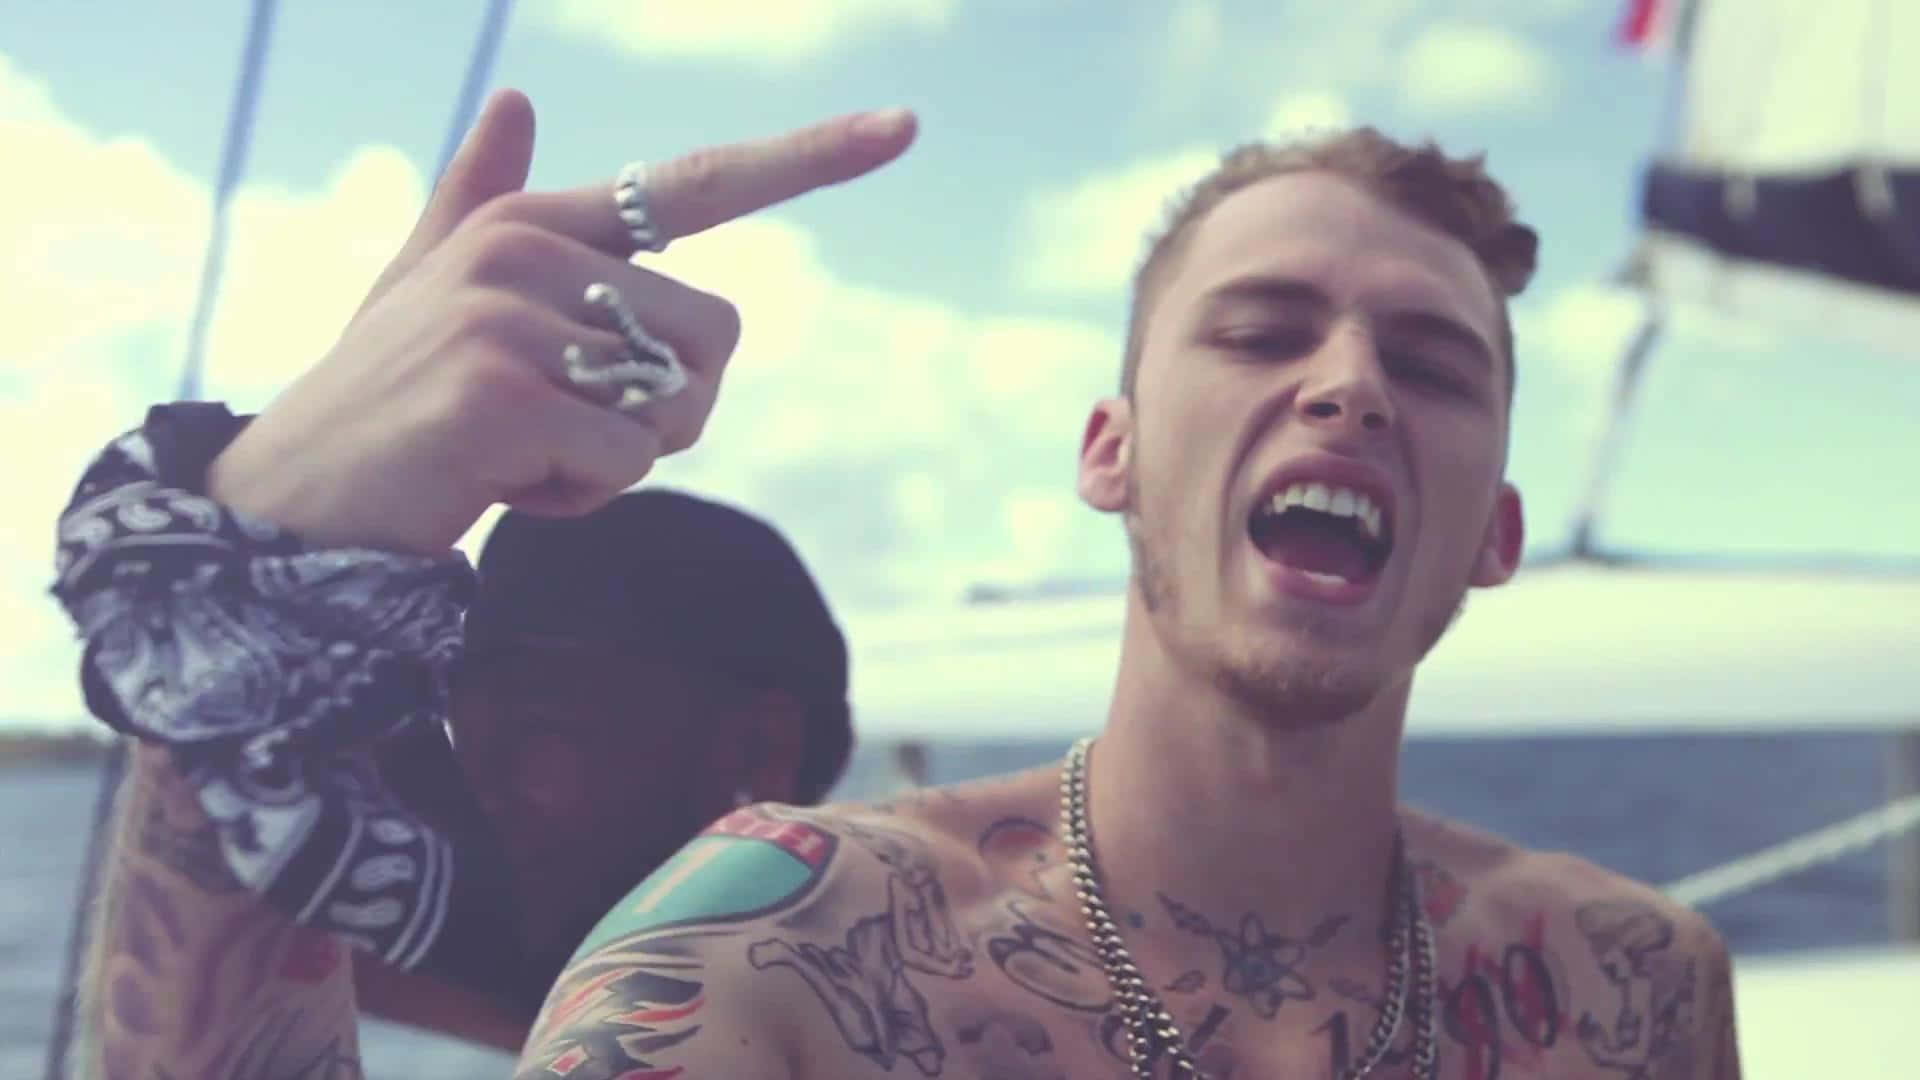 Multi talented artist MGK performing for an adoring crowd Wallpaper